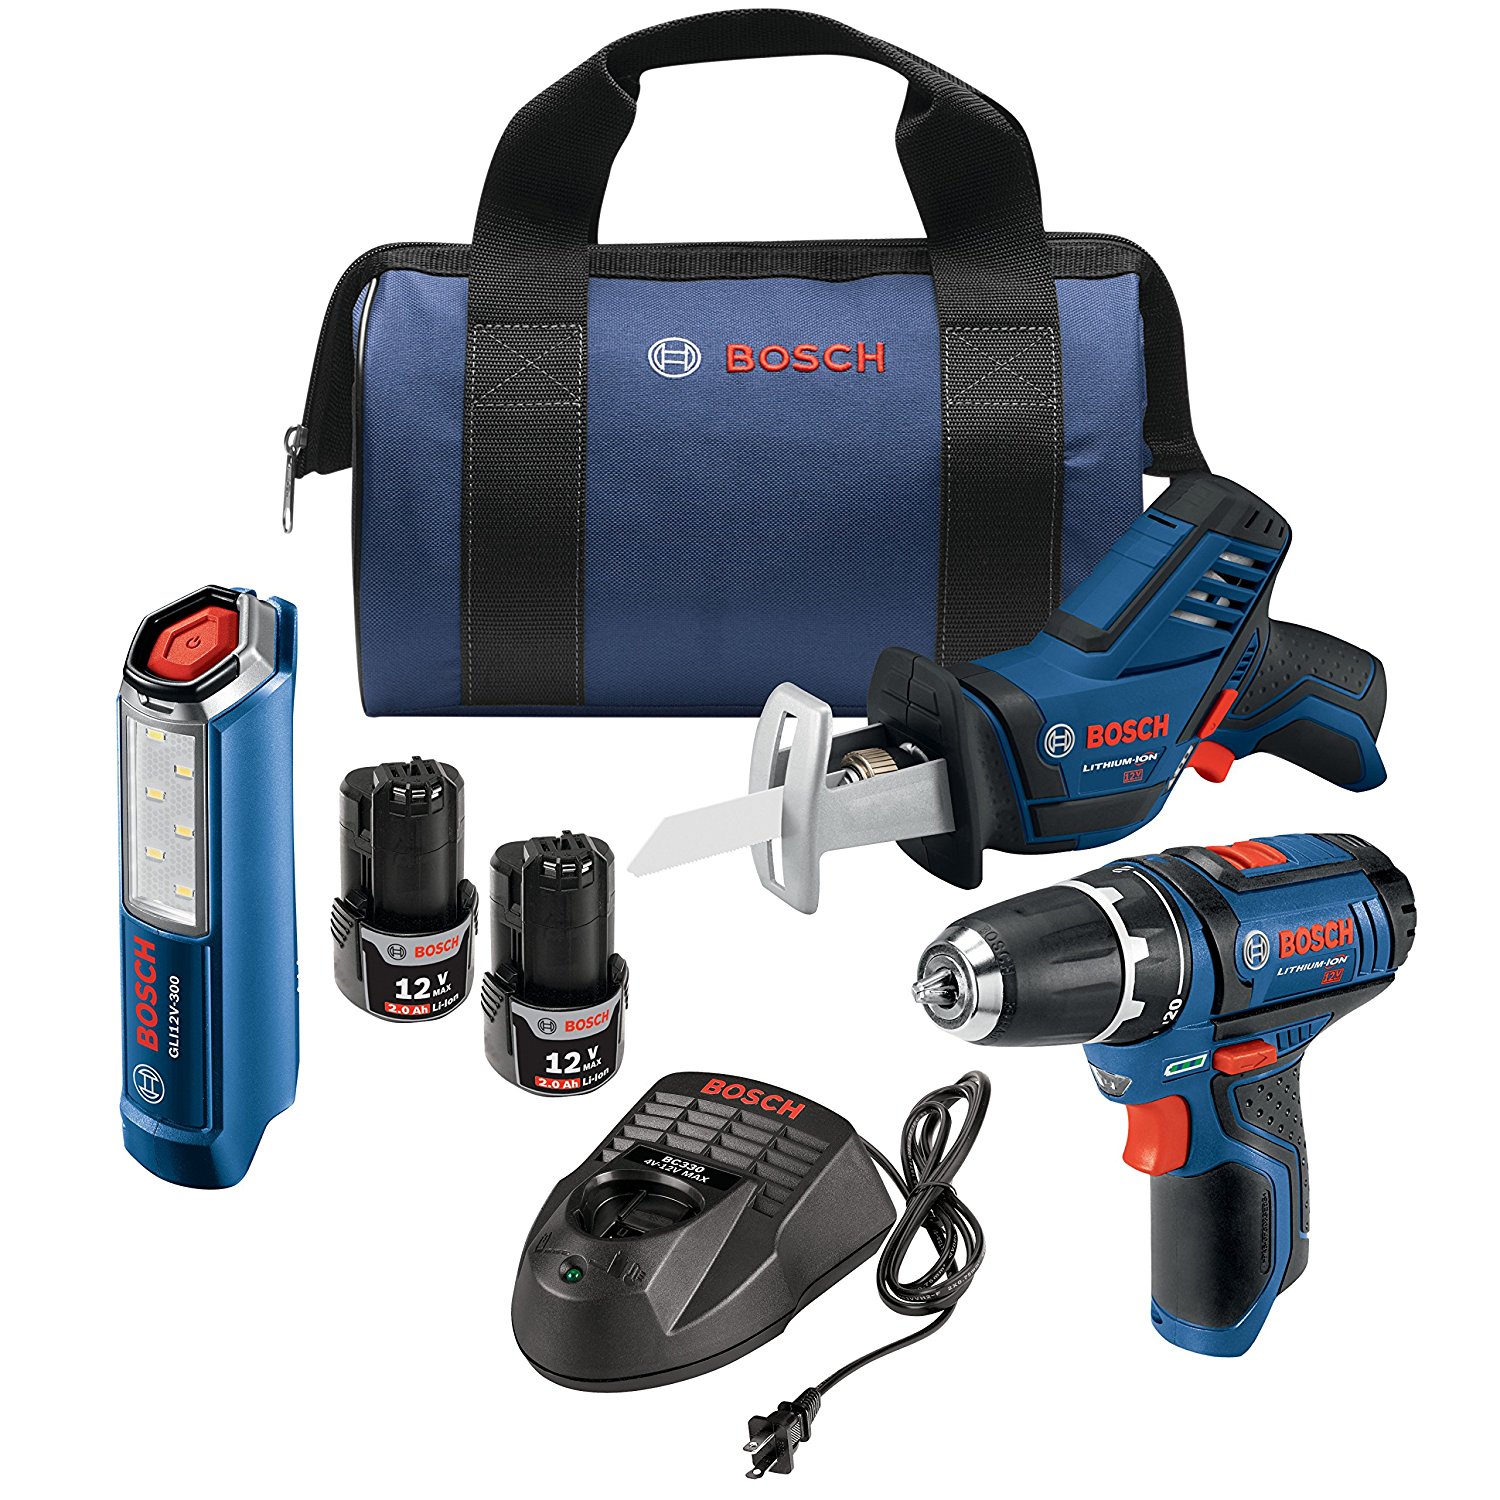 Today only: Bosch 12V Max 3-tool combo kit for $120